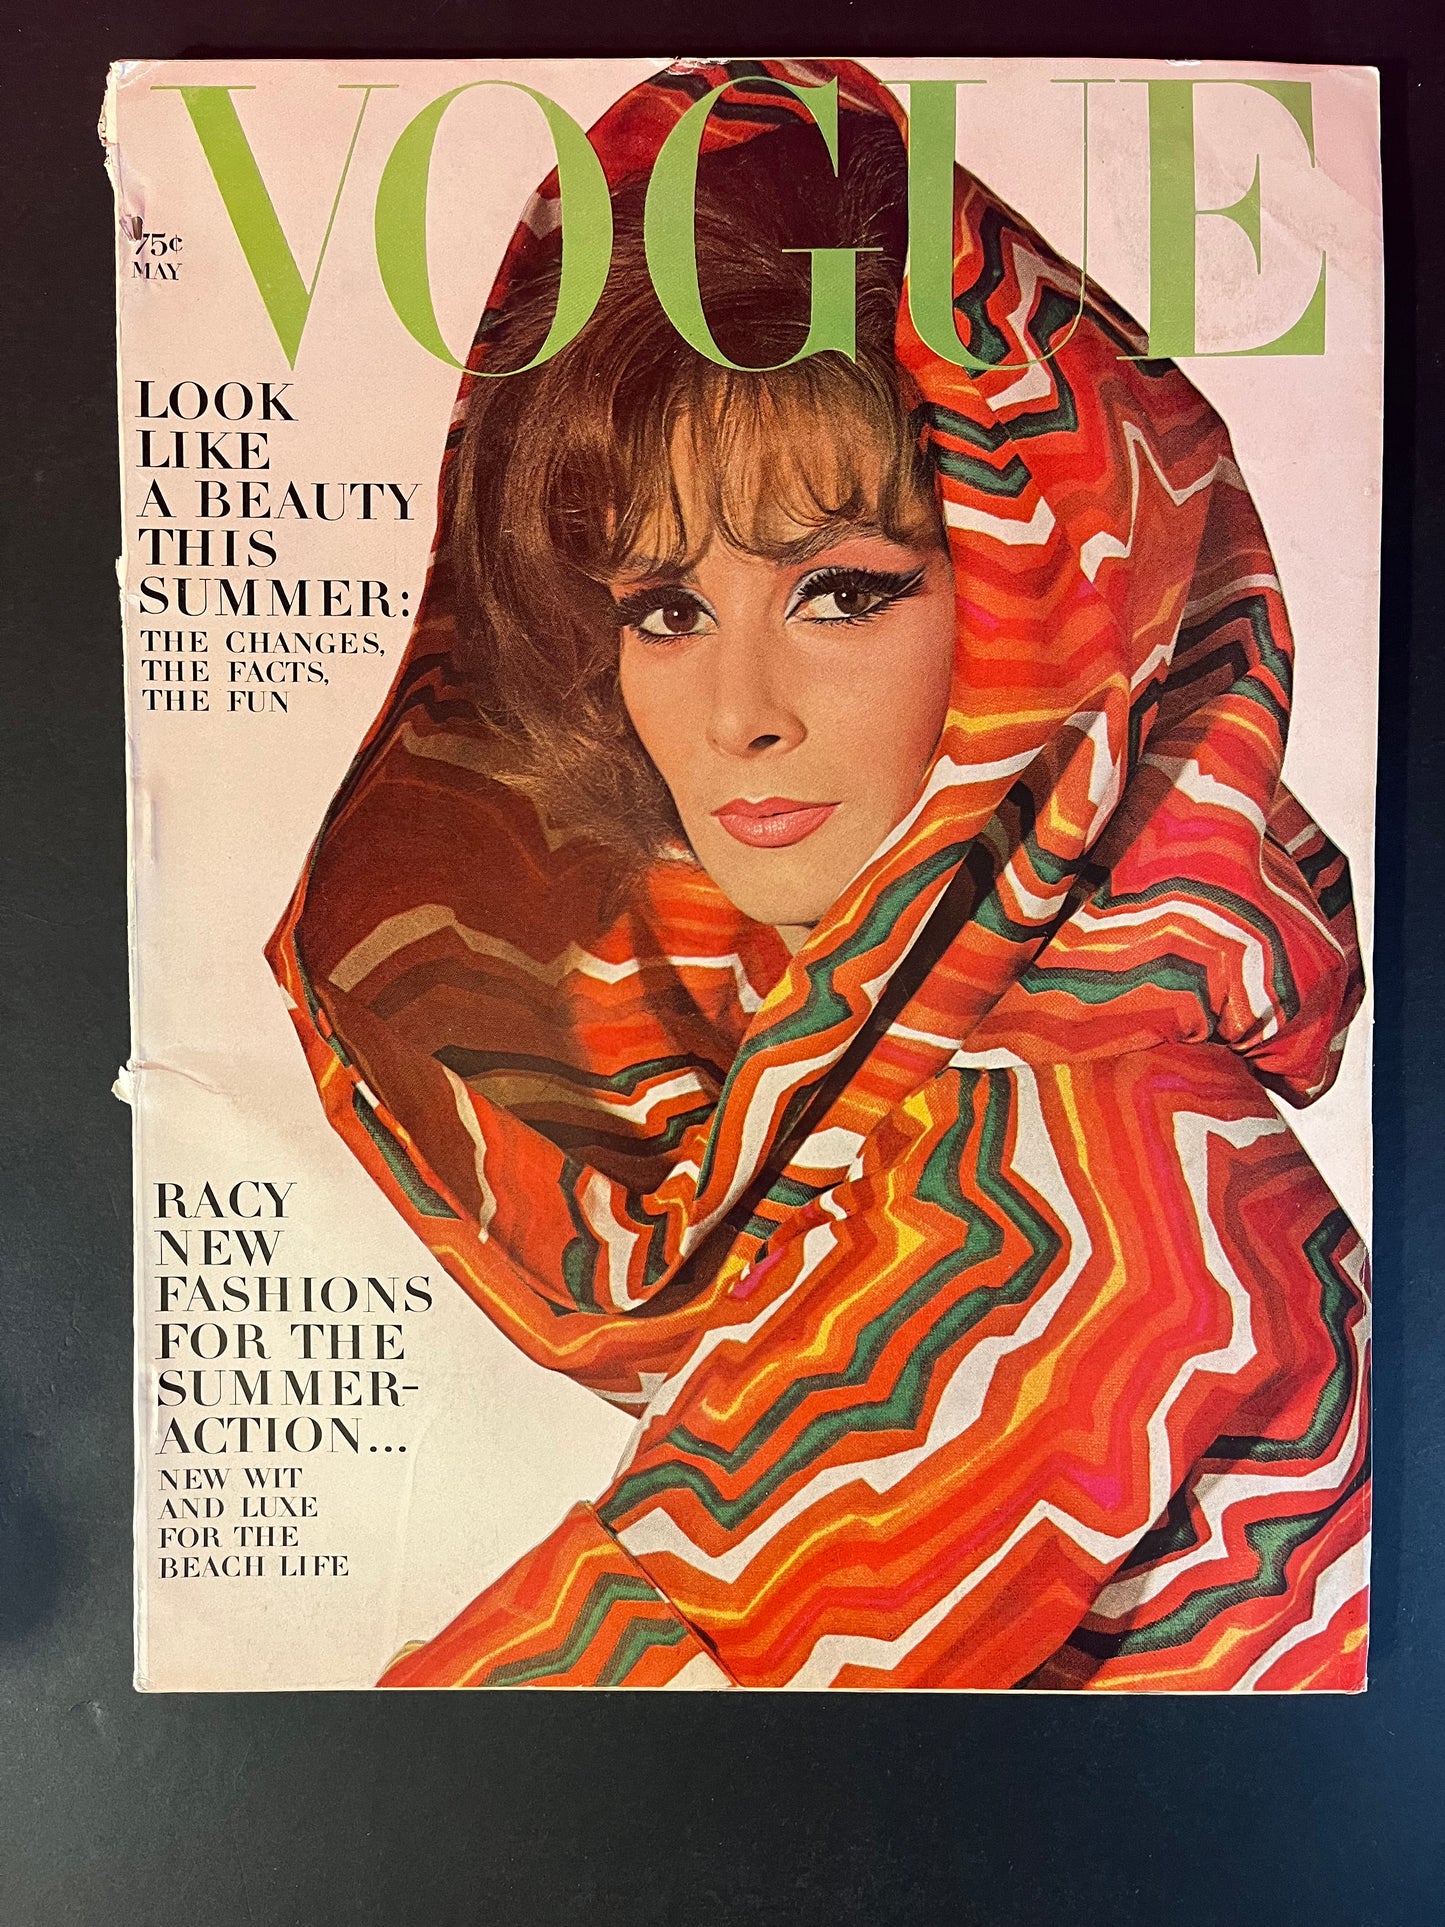 Vintage Vogue Magazine - May 1964 Issue - Collectible Fashion & Lifestyle Edition